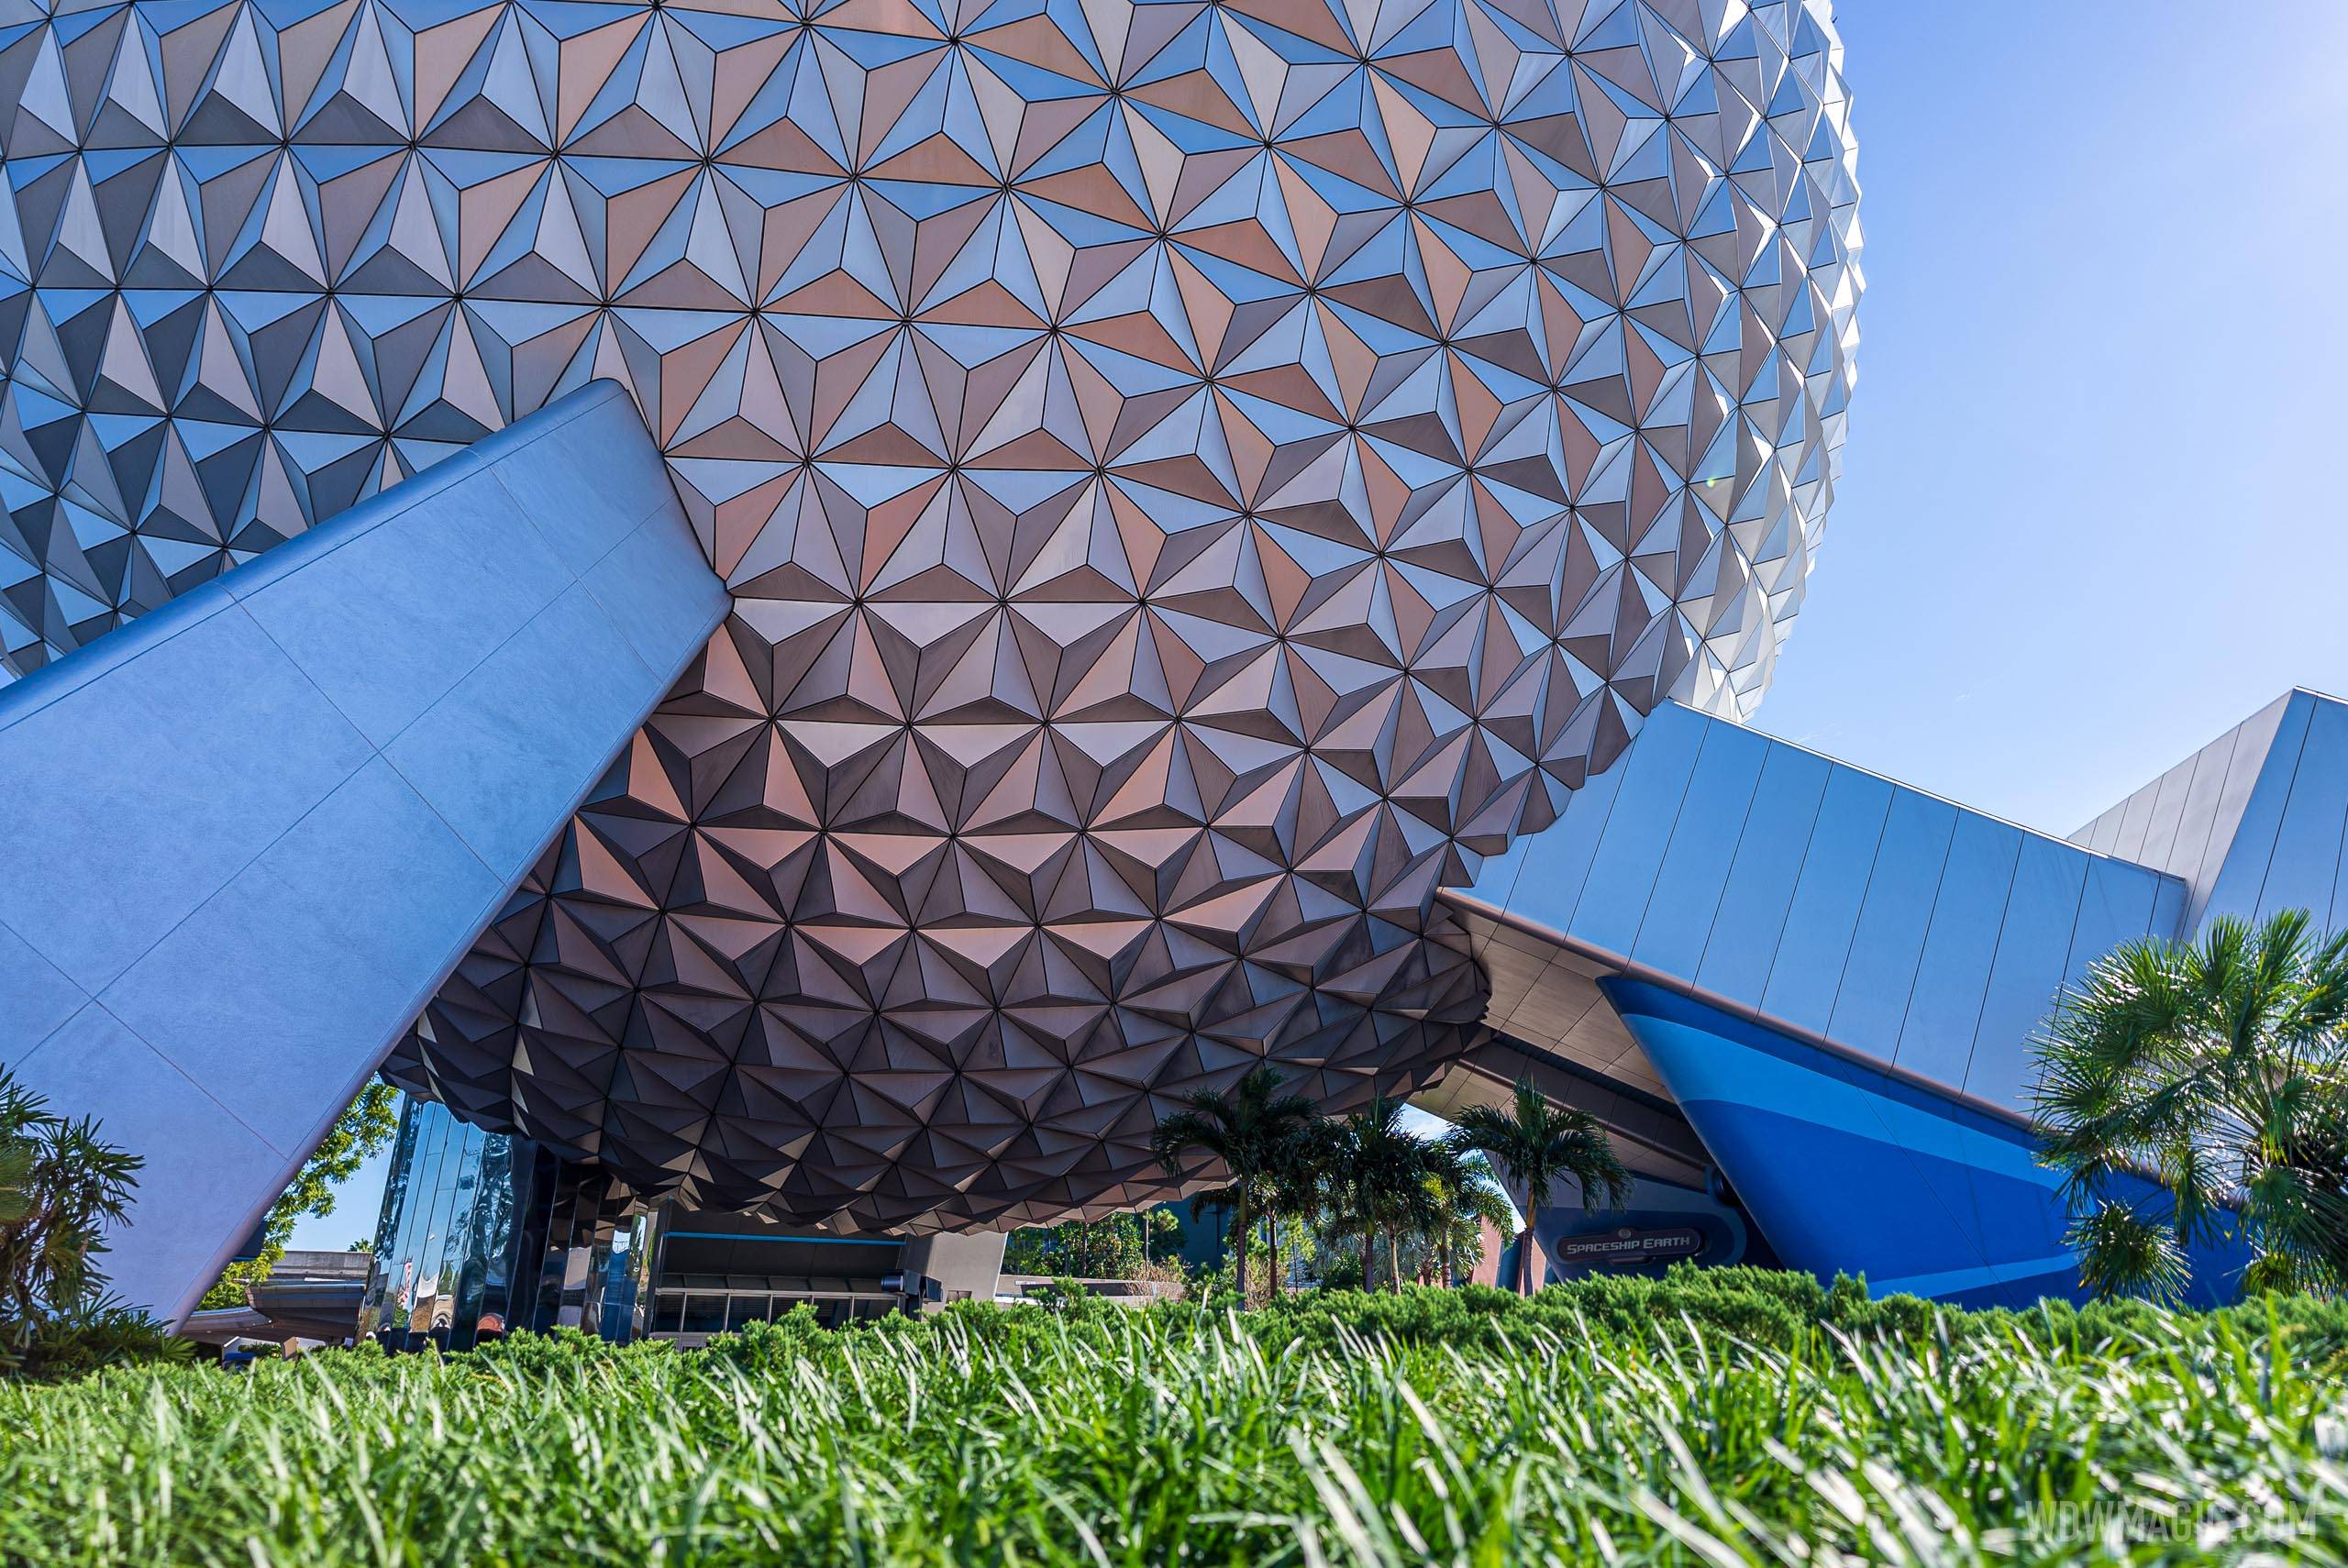 AT&T pulling sponsorship from Spaceship Earth